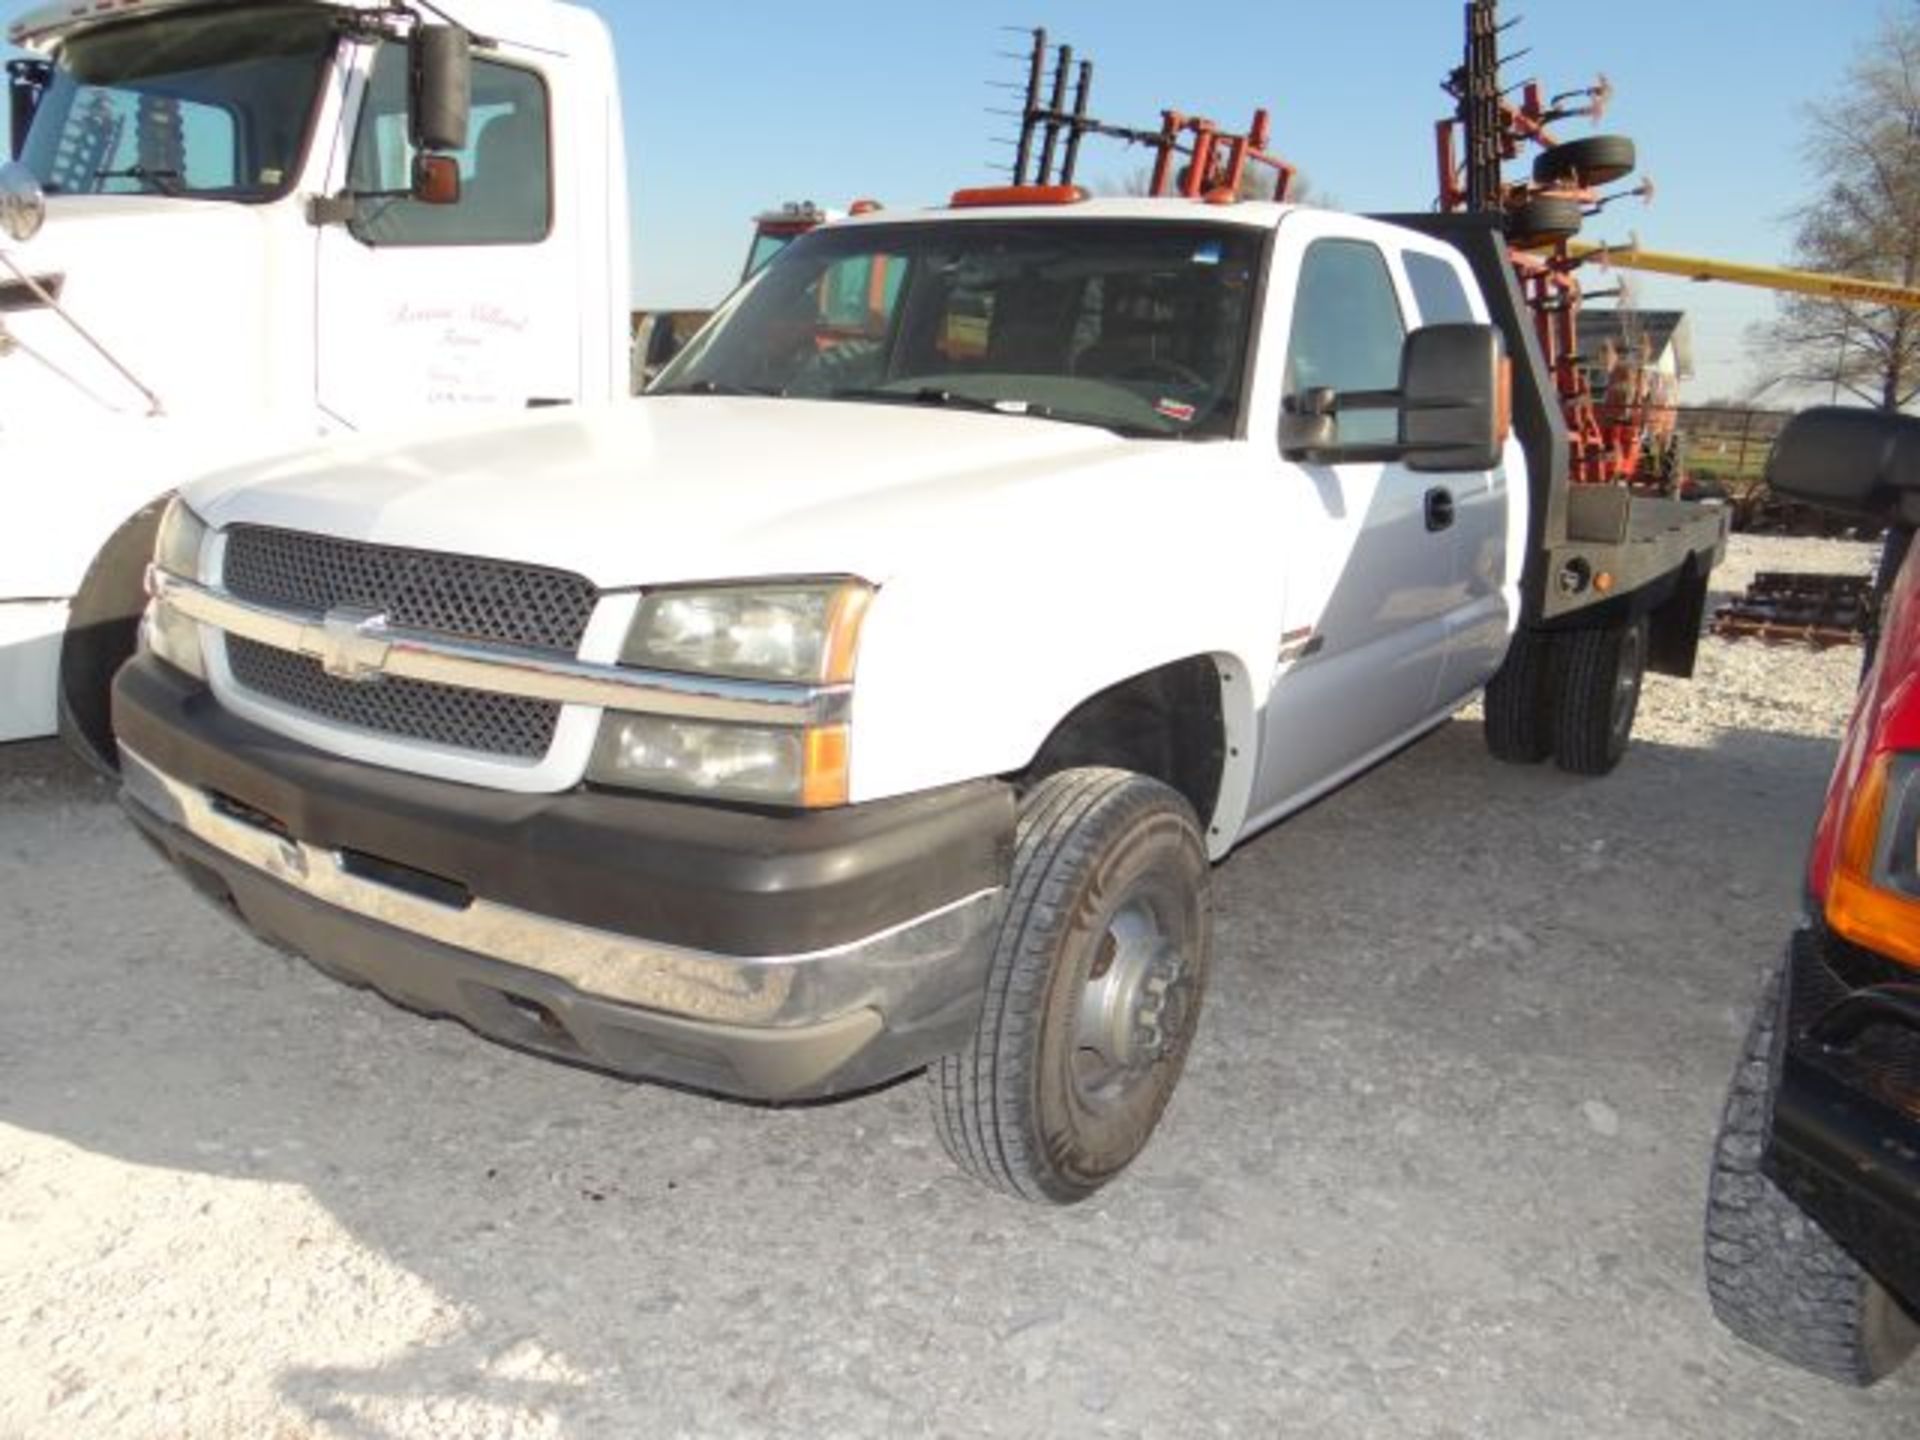 2003 Chev 3500 Truck - Image 6 of 7